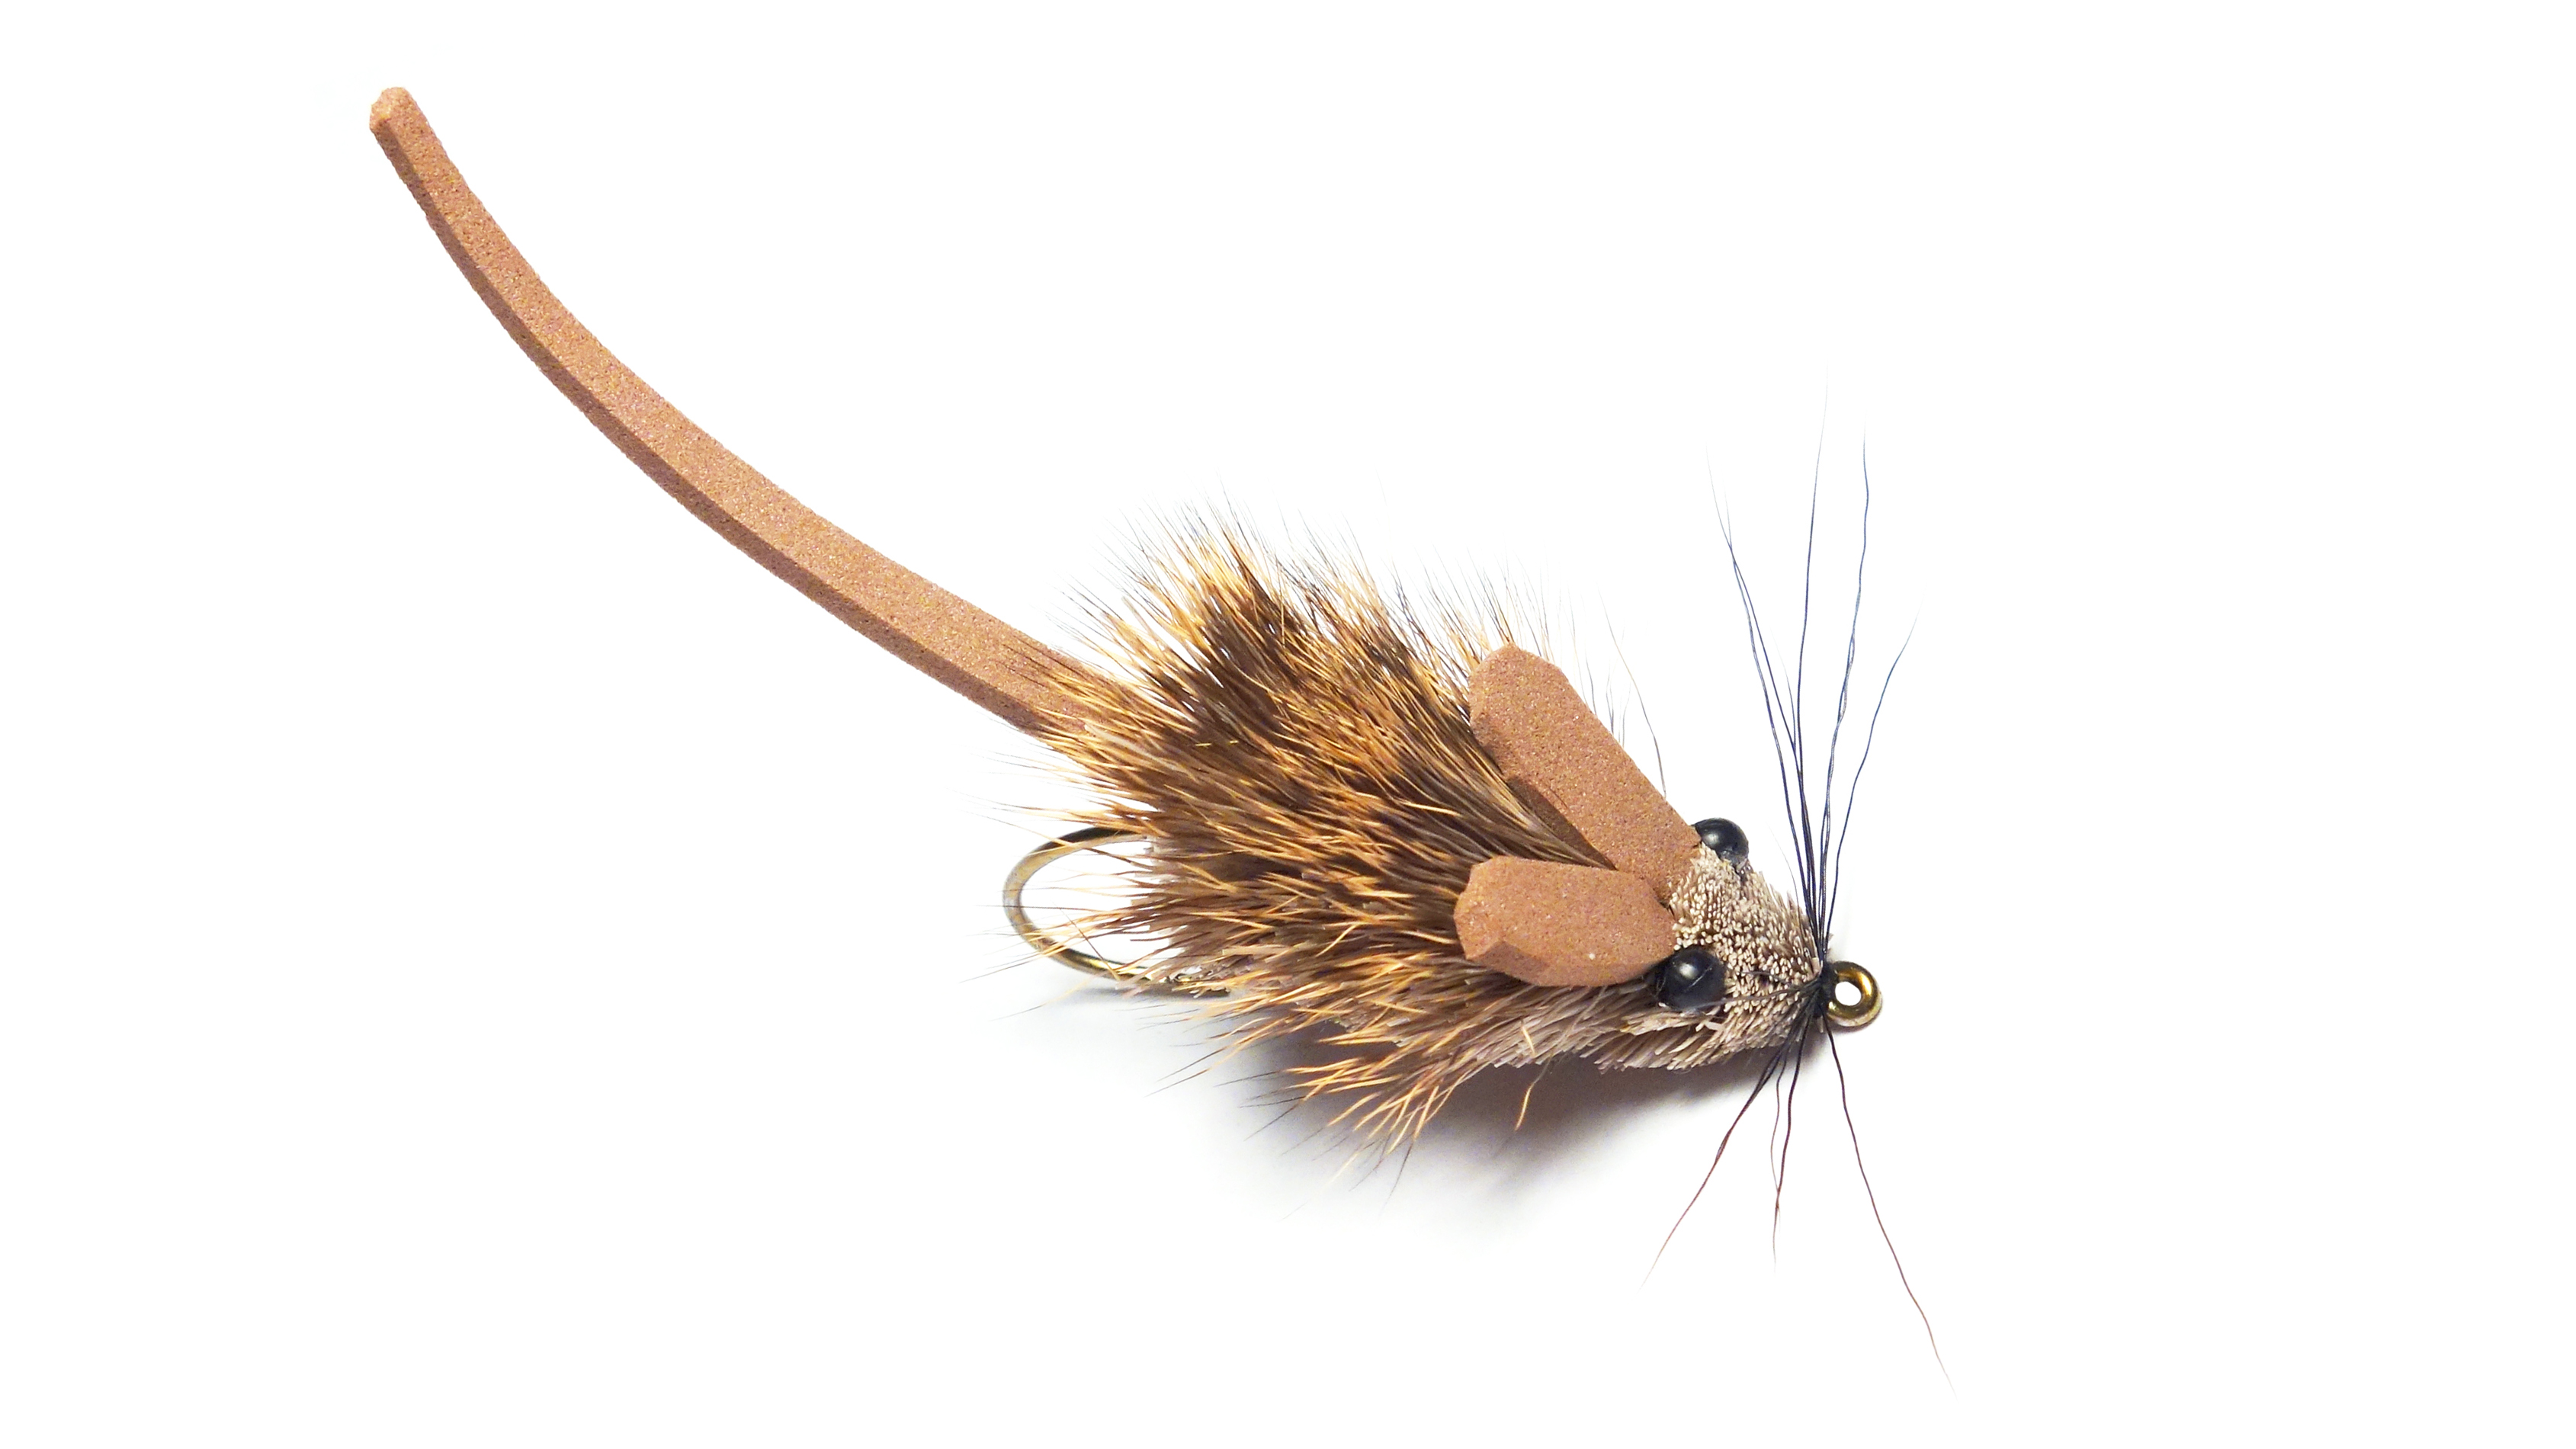 Mouse Rat Fly Tying Video Instructions and Directions - Whitlock's